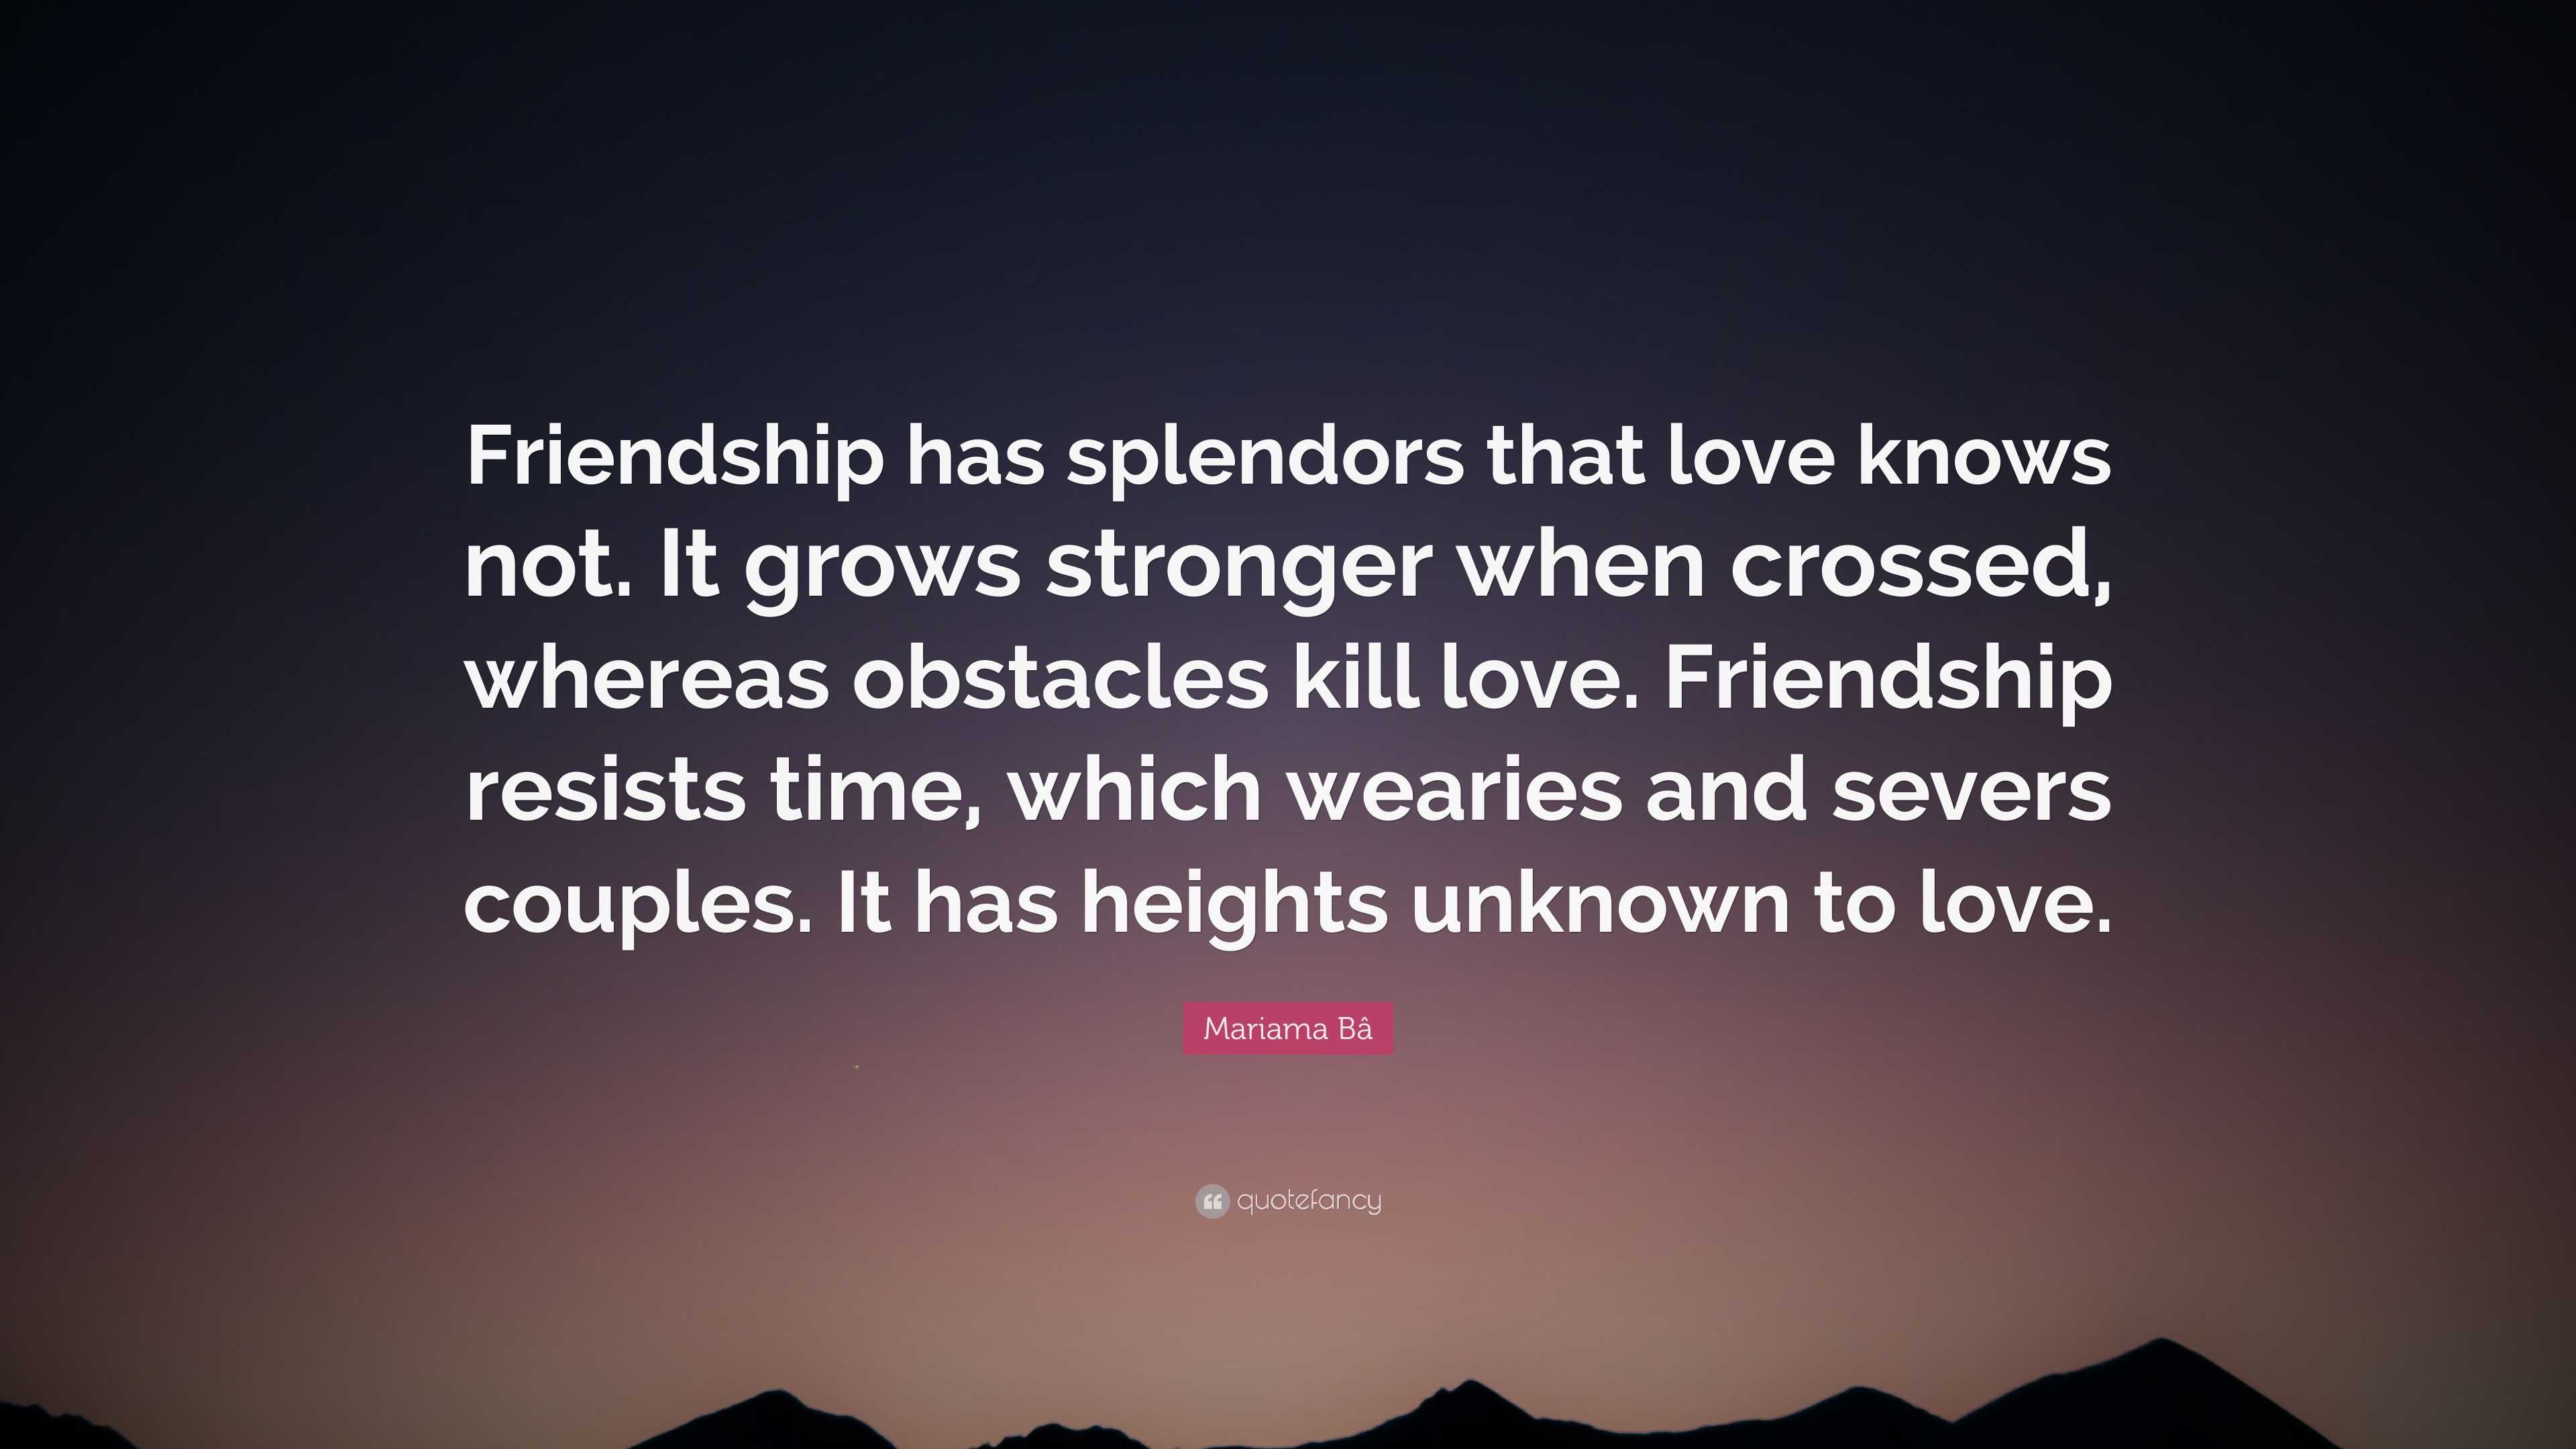 Mariama B¢ Quote “Friendship has splendors that love knows not It grows stronger